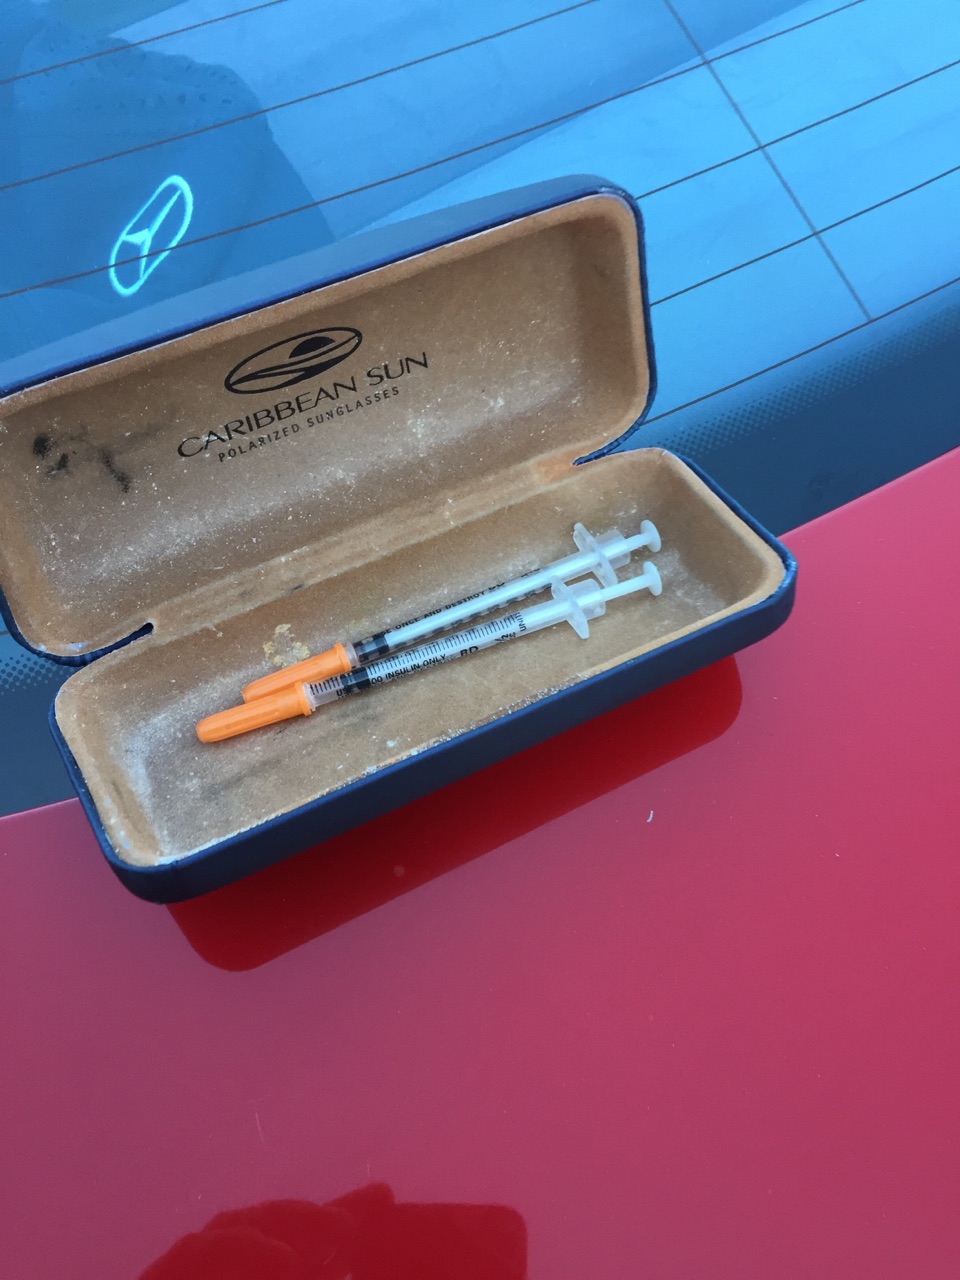 Needles used for drugs